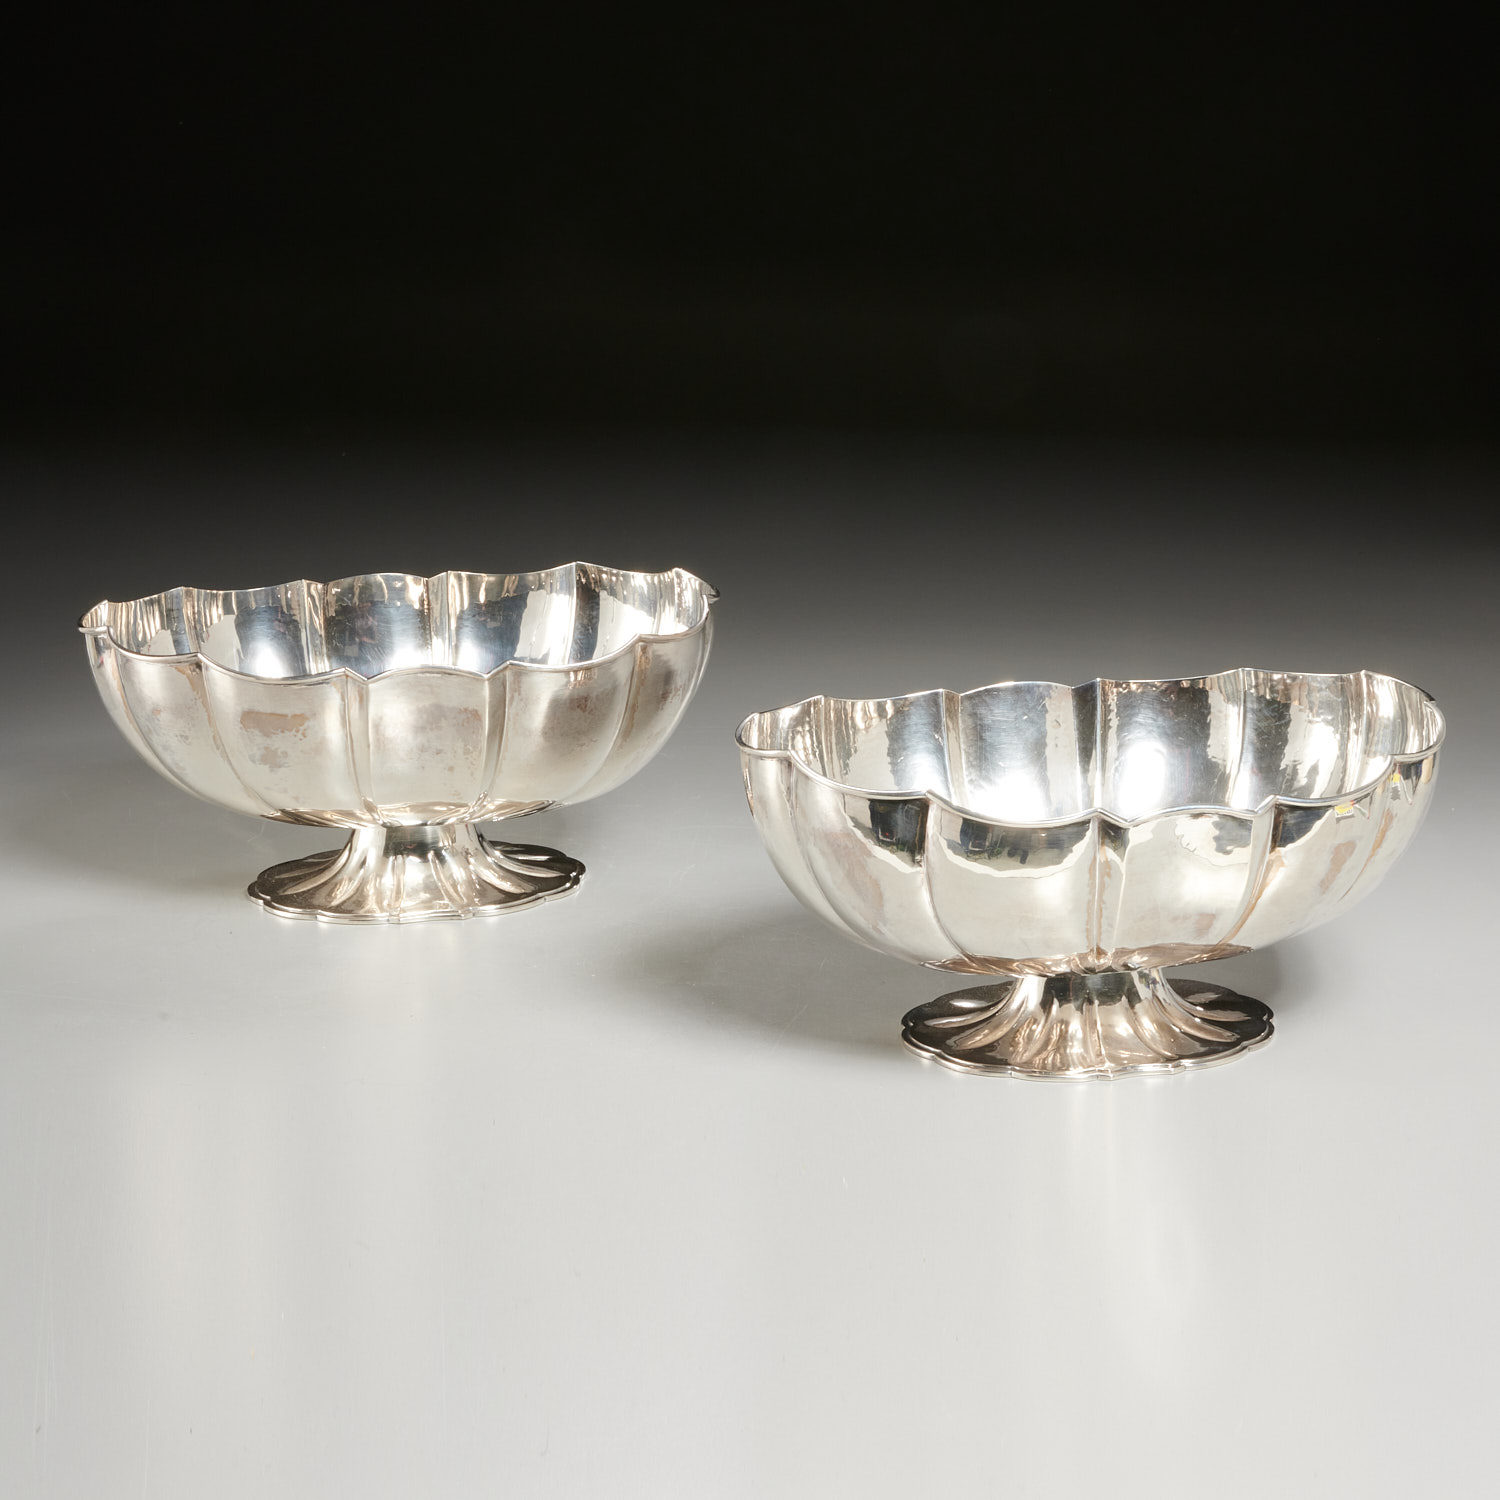 BUCCELLATI PAIR SILVER FOOTED 2ce97f